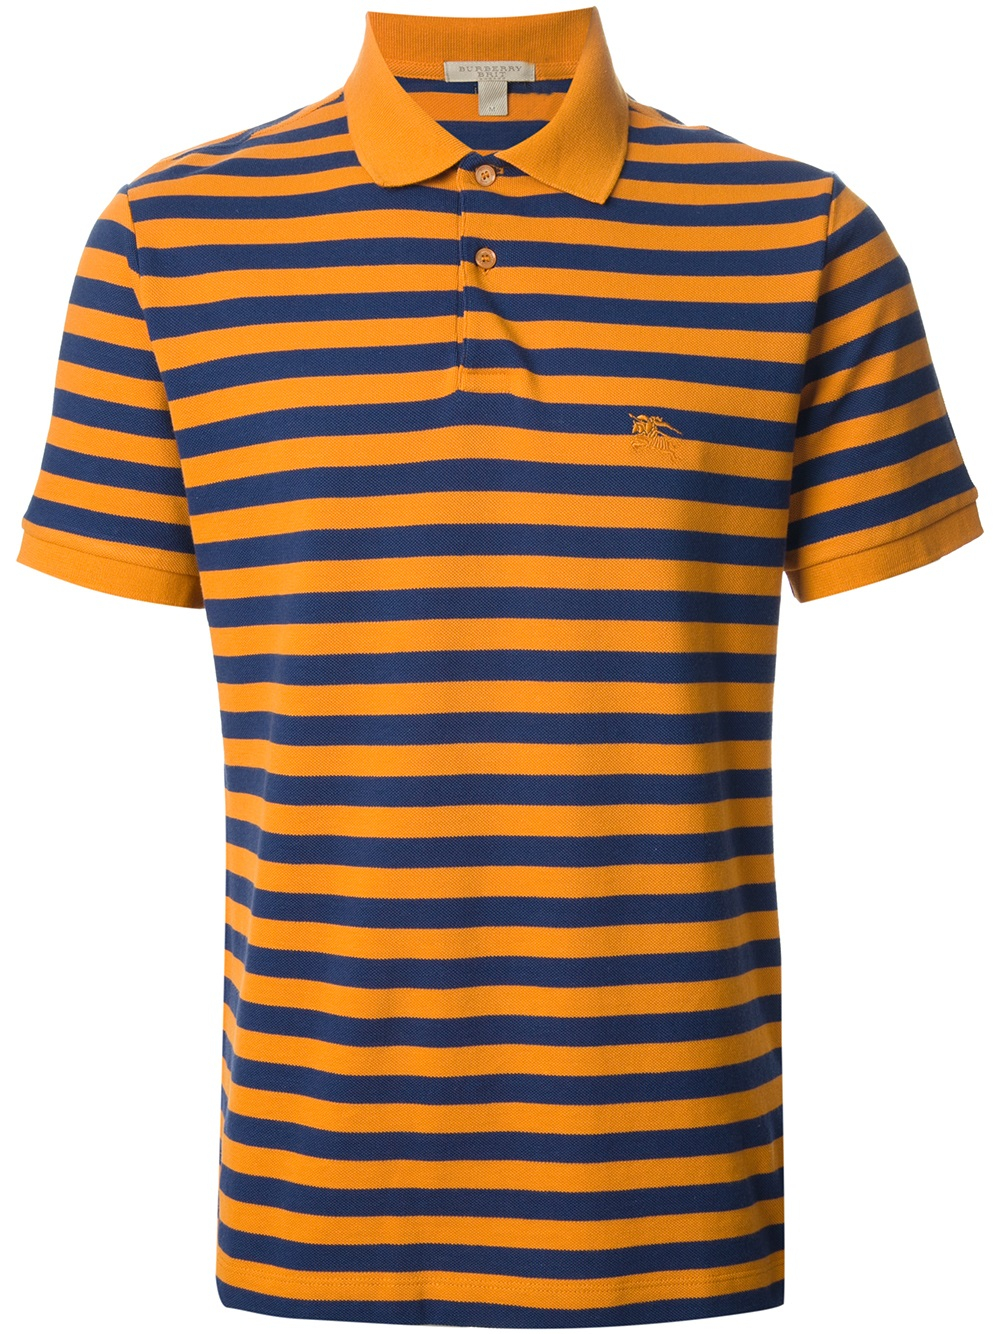 Lyst Burberry Brit Striped  Polo Shirt  in Blue for Men